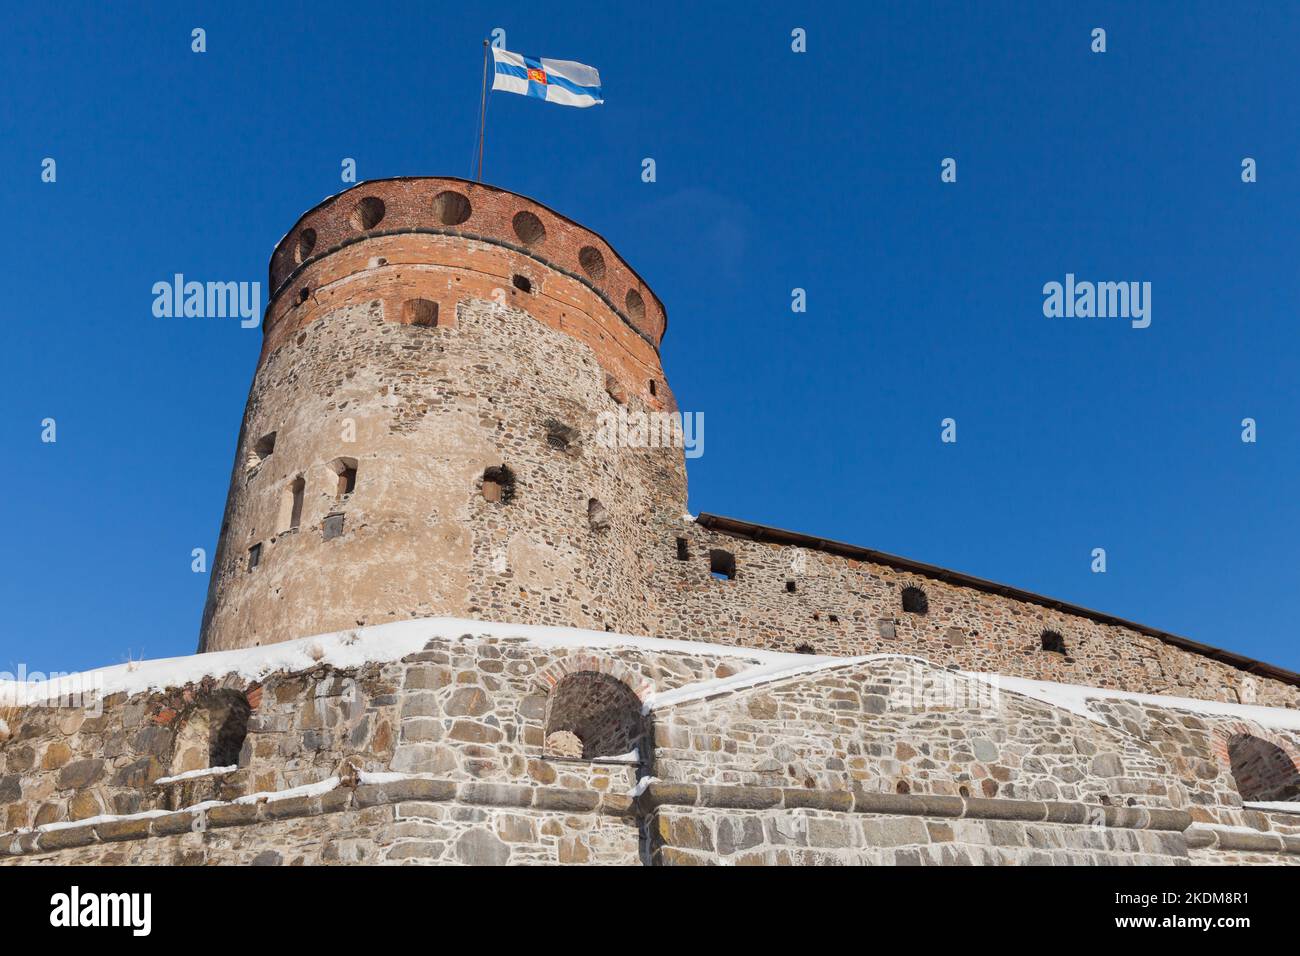 Round tower of Olavinlinna is under blue sky on a sunny day. It is a 15th-century three-tower castle located in Savonlinna, Finland. The fortress was Stock Photo